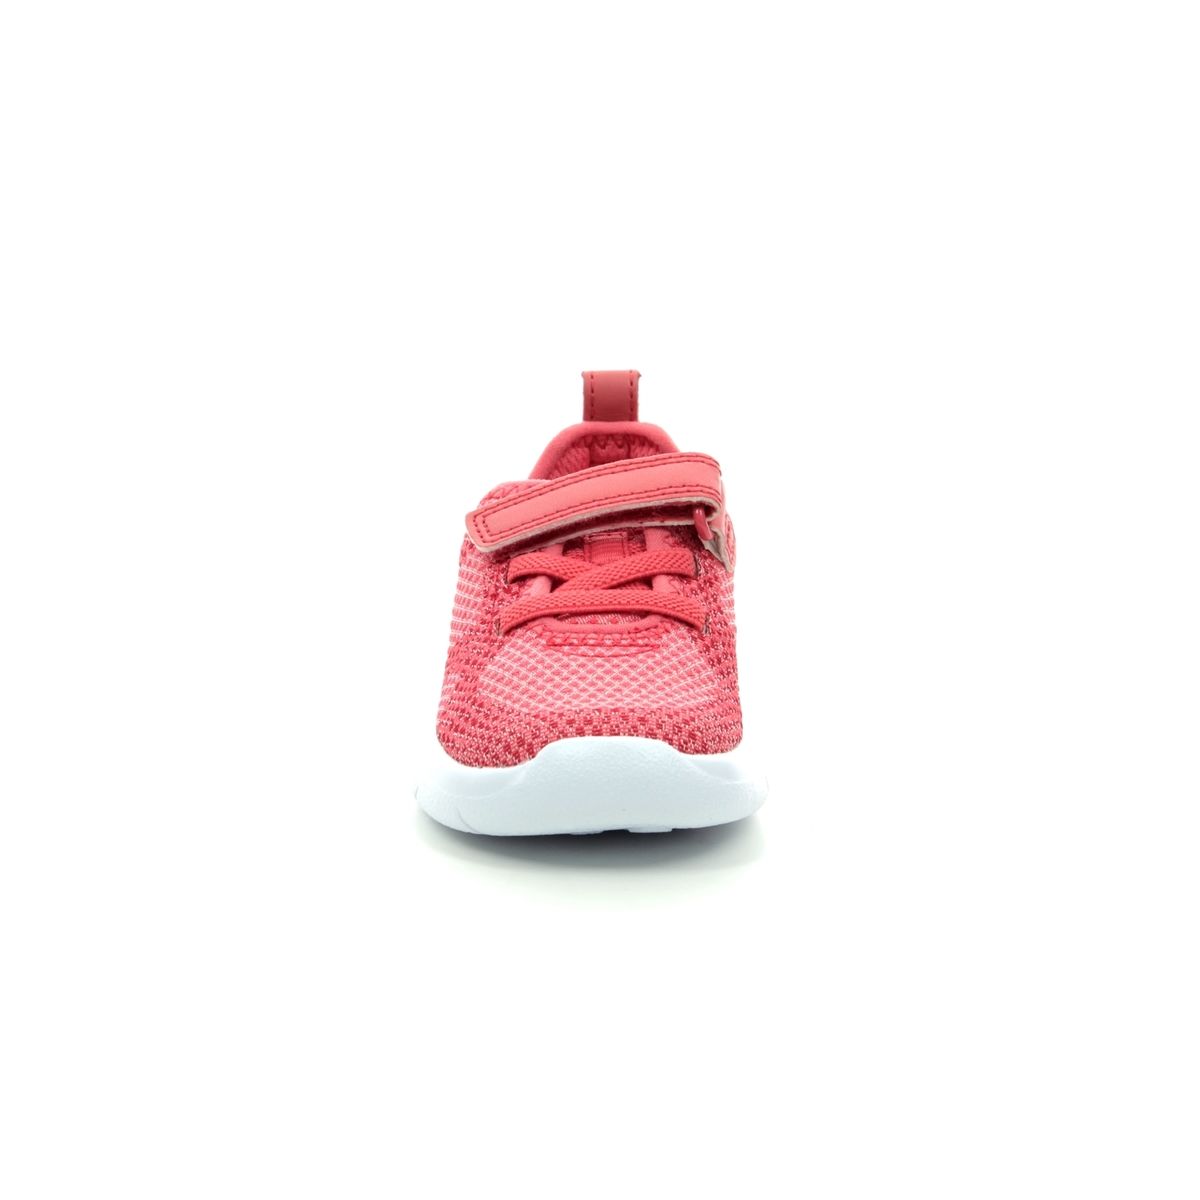 Clarks Ath Flux Toddler Textile Shoes in Pink Standard Fit Size 6